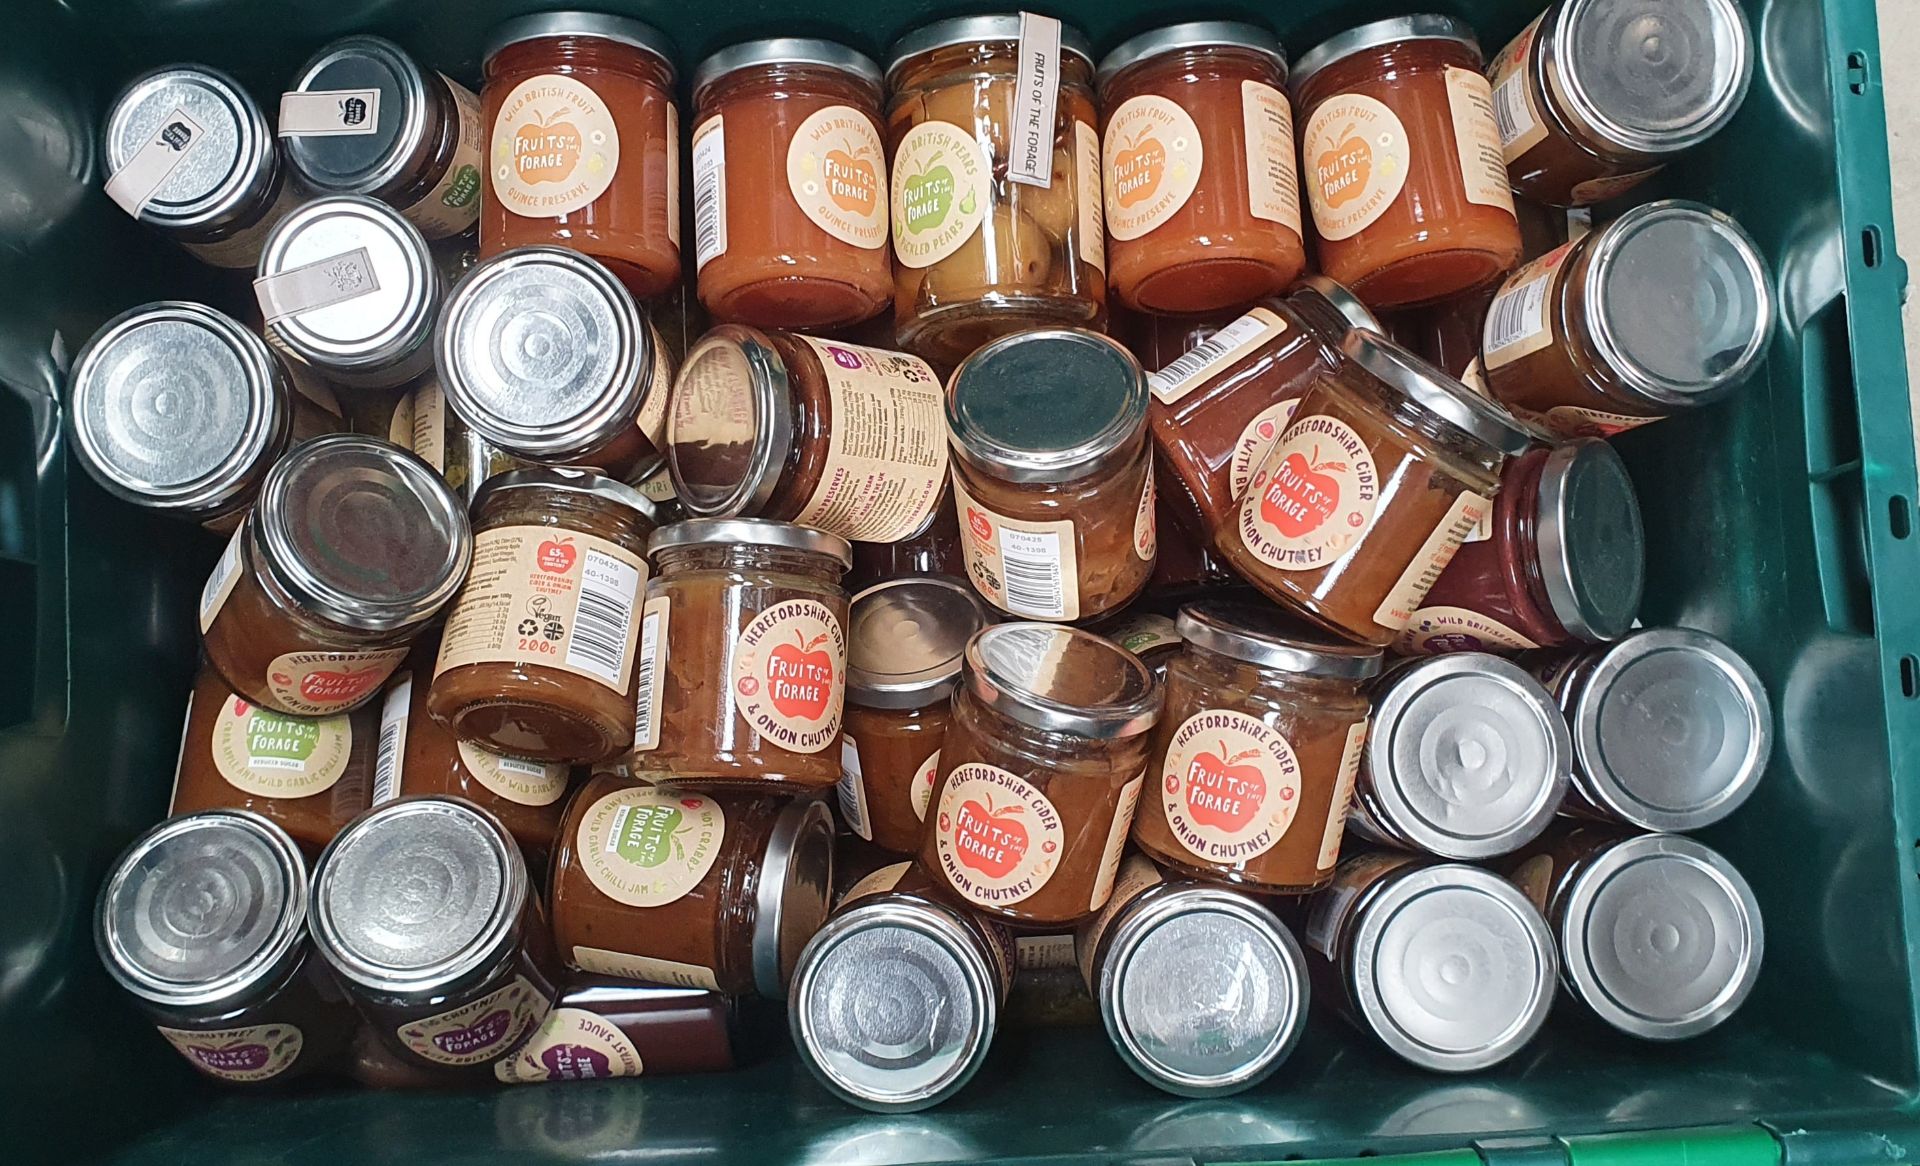 63 x Jars/Bottles of Fruits of Forage Sauces/Chutneys/Pickled Food - Ref: TCH450 - CL840 - Location: - Image 15 of 15